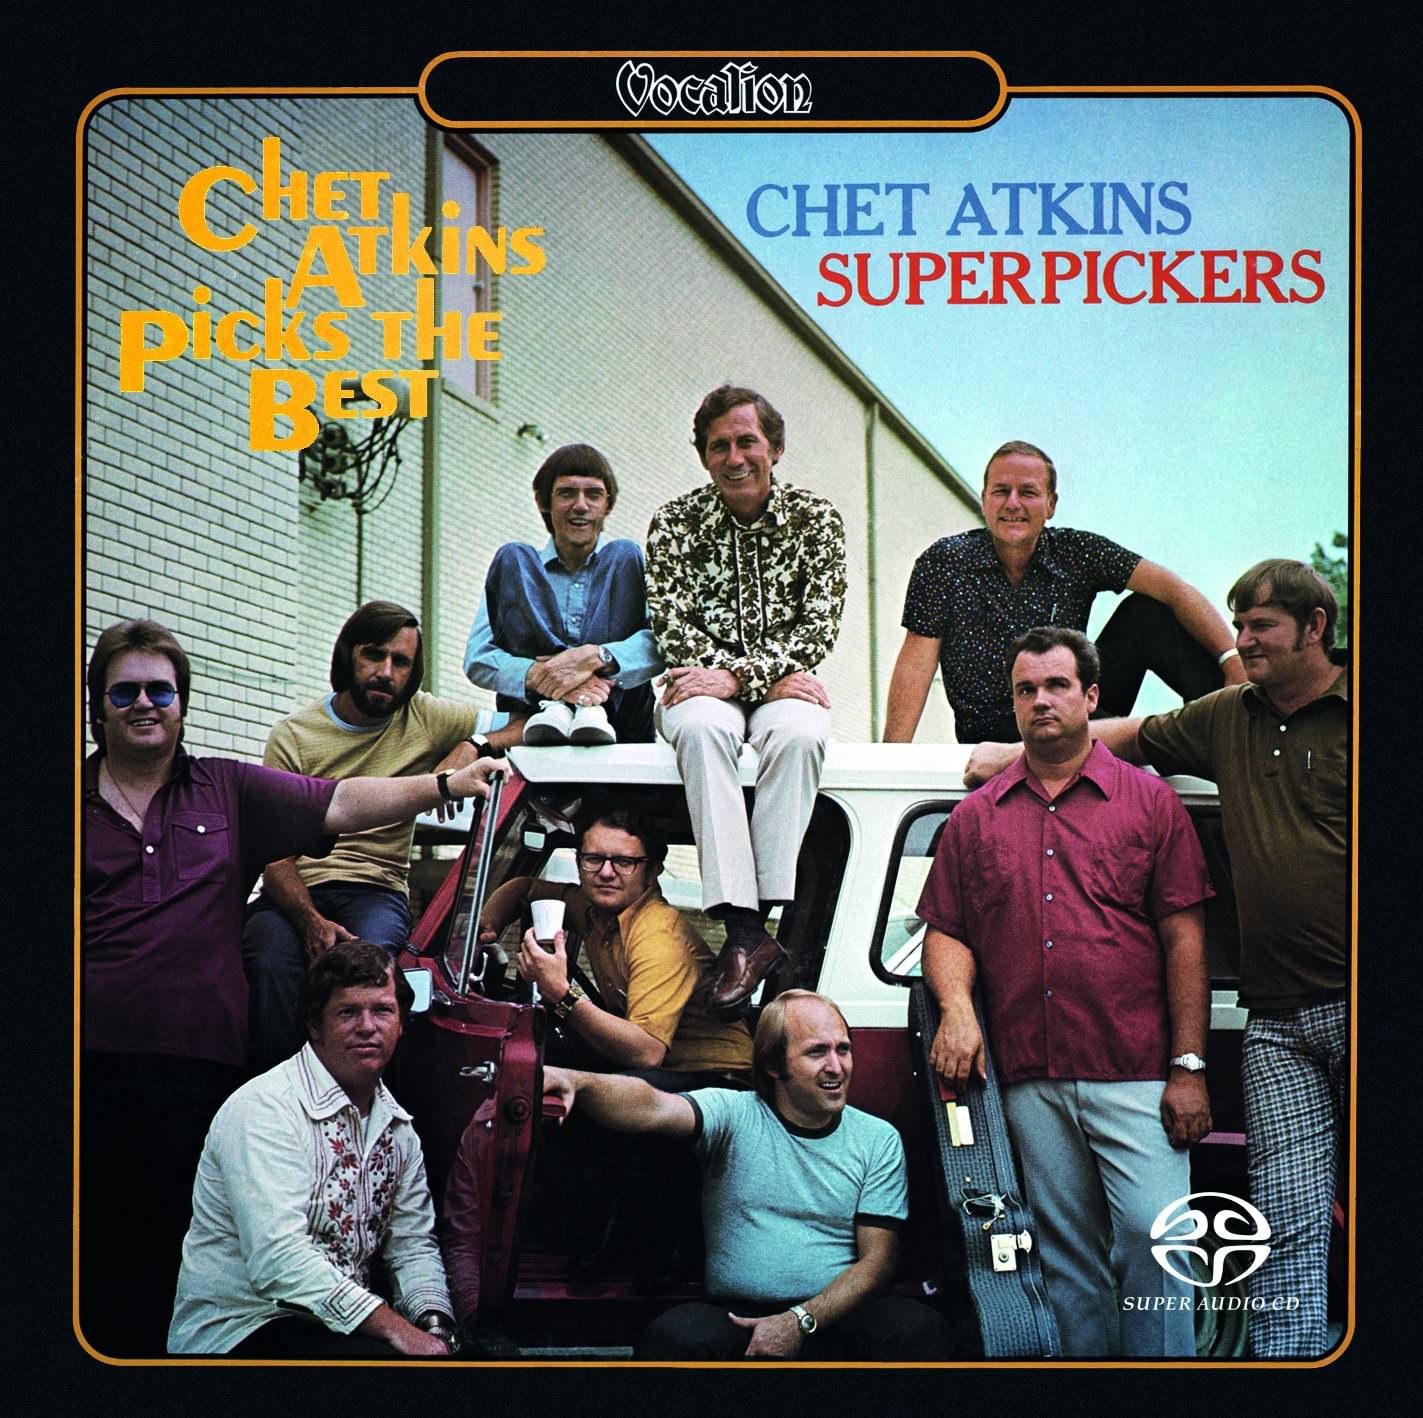 Chet Atkins – Superpickers & Chet Atkins Picks The Best (1973-1967) [Reissue 2018] SACD ISO + Hi-Res FLAC